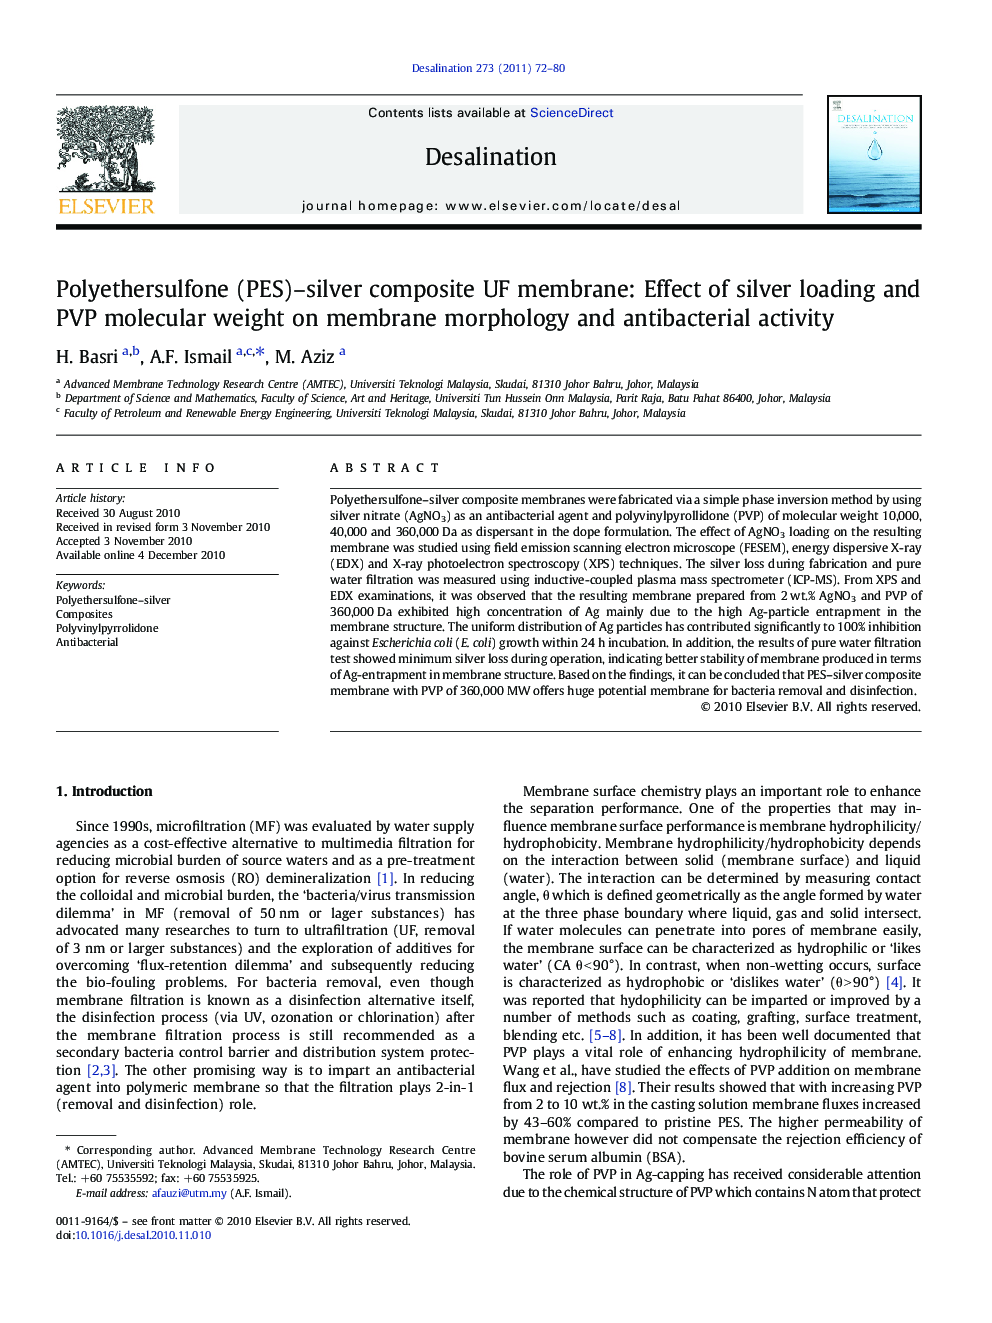 Polyethersulfone (PES)–silver composite UF membrane: Effect of silver loading and PVP molecular weight on membrane morphology and antibacterial activity